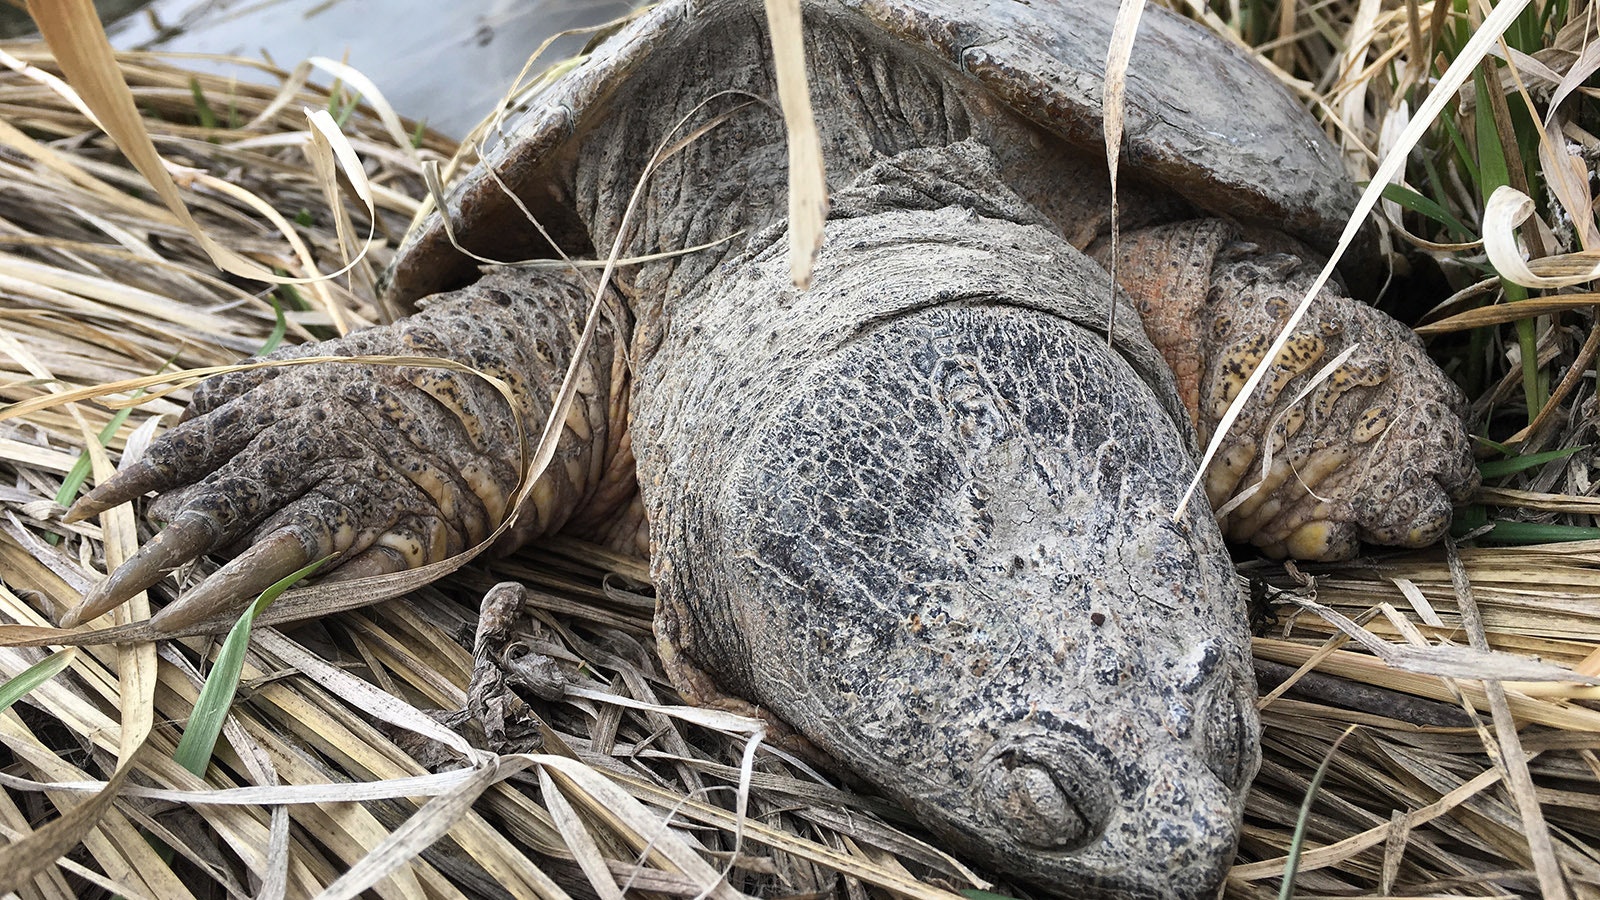 A common snapping turtle, affectionately called Old Snappy, hangs out in the vicinity of Grey Reef Road along Wyoming’s North Platte River. It’s thought to be the same turtle that was set free by a biologist in the 1970s.